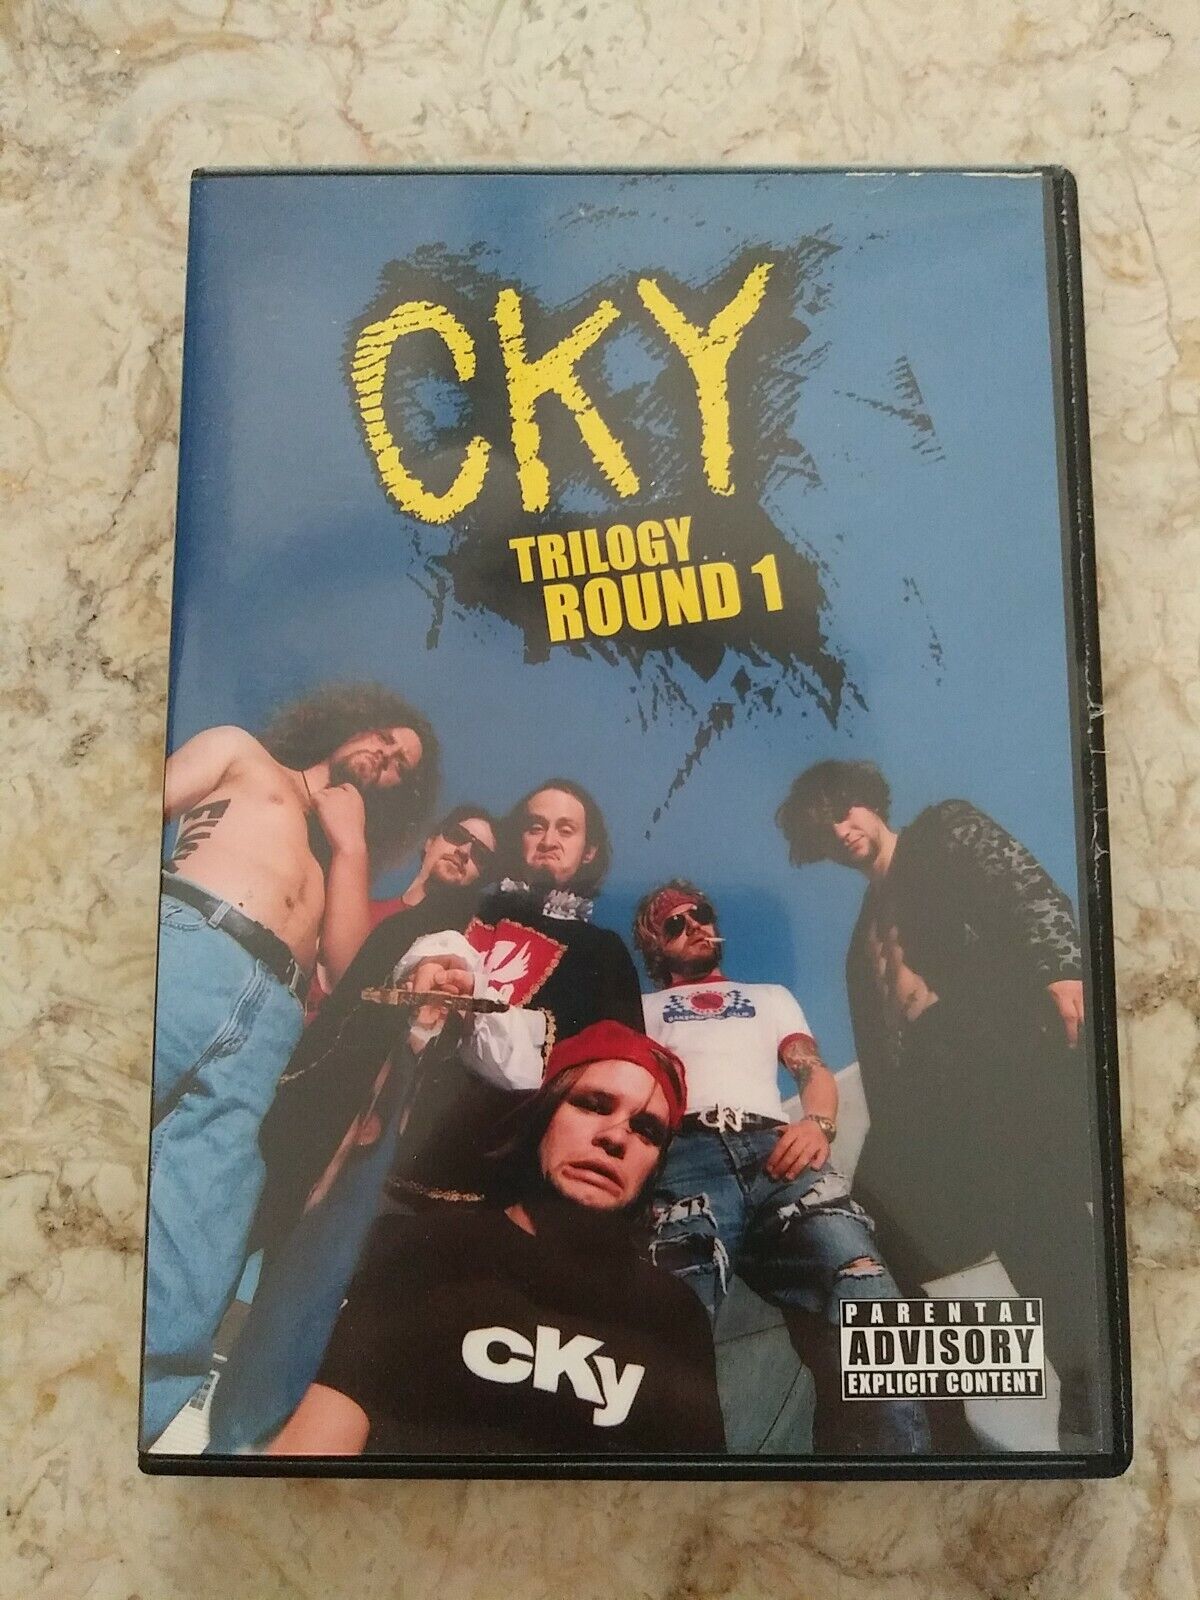 CKY1 for sale online DVD, 2001 